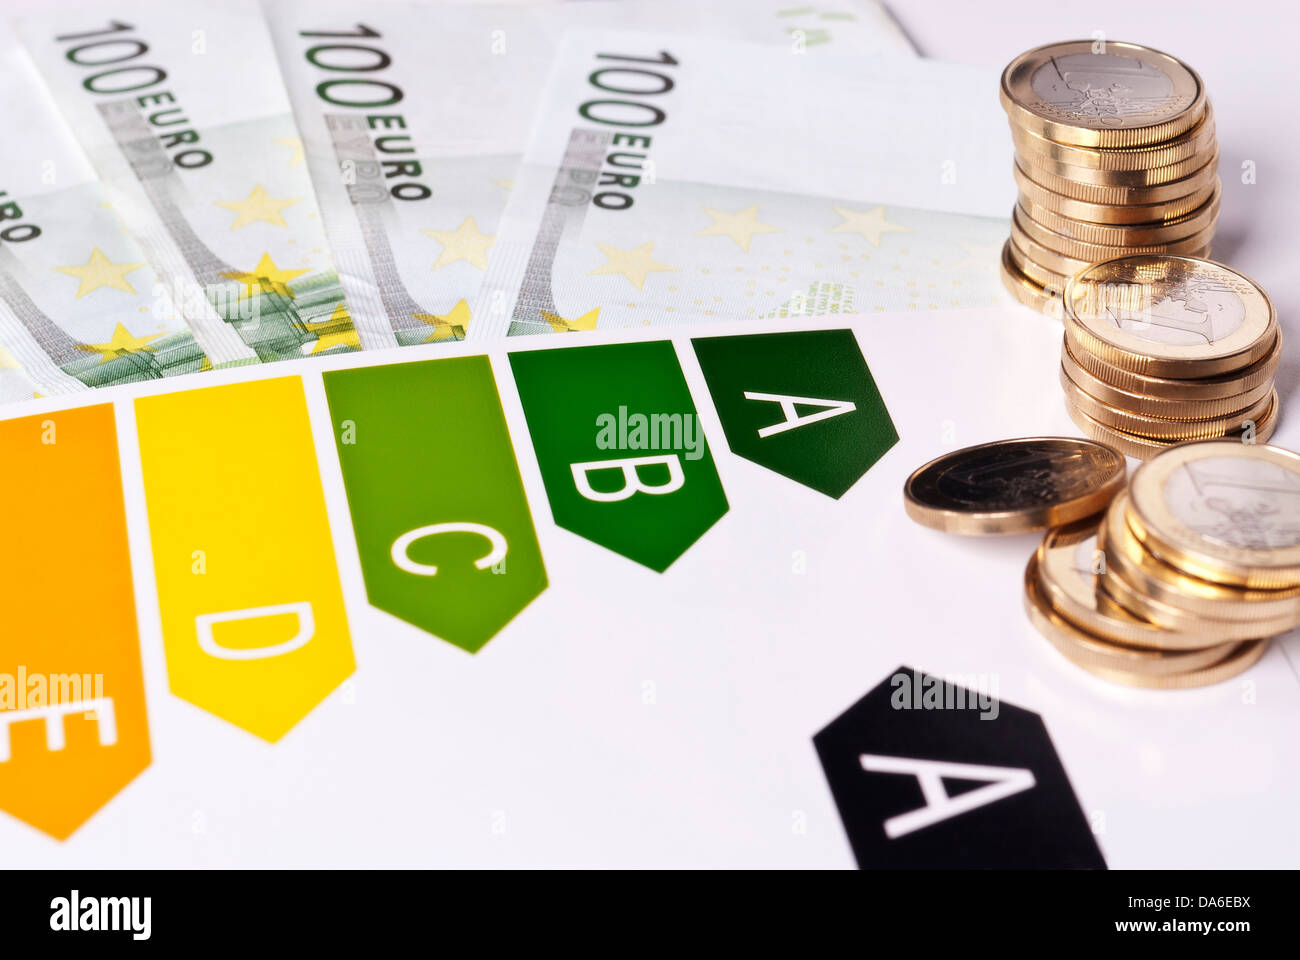 Energy efficiency label, euro coins and euro notes. Stock Photo